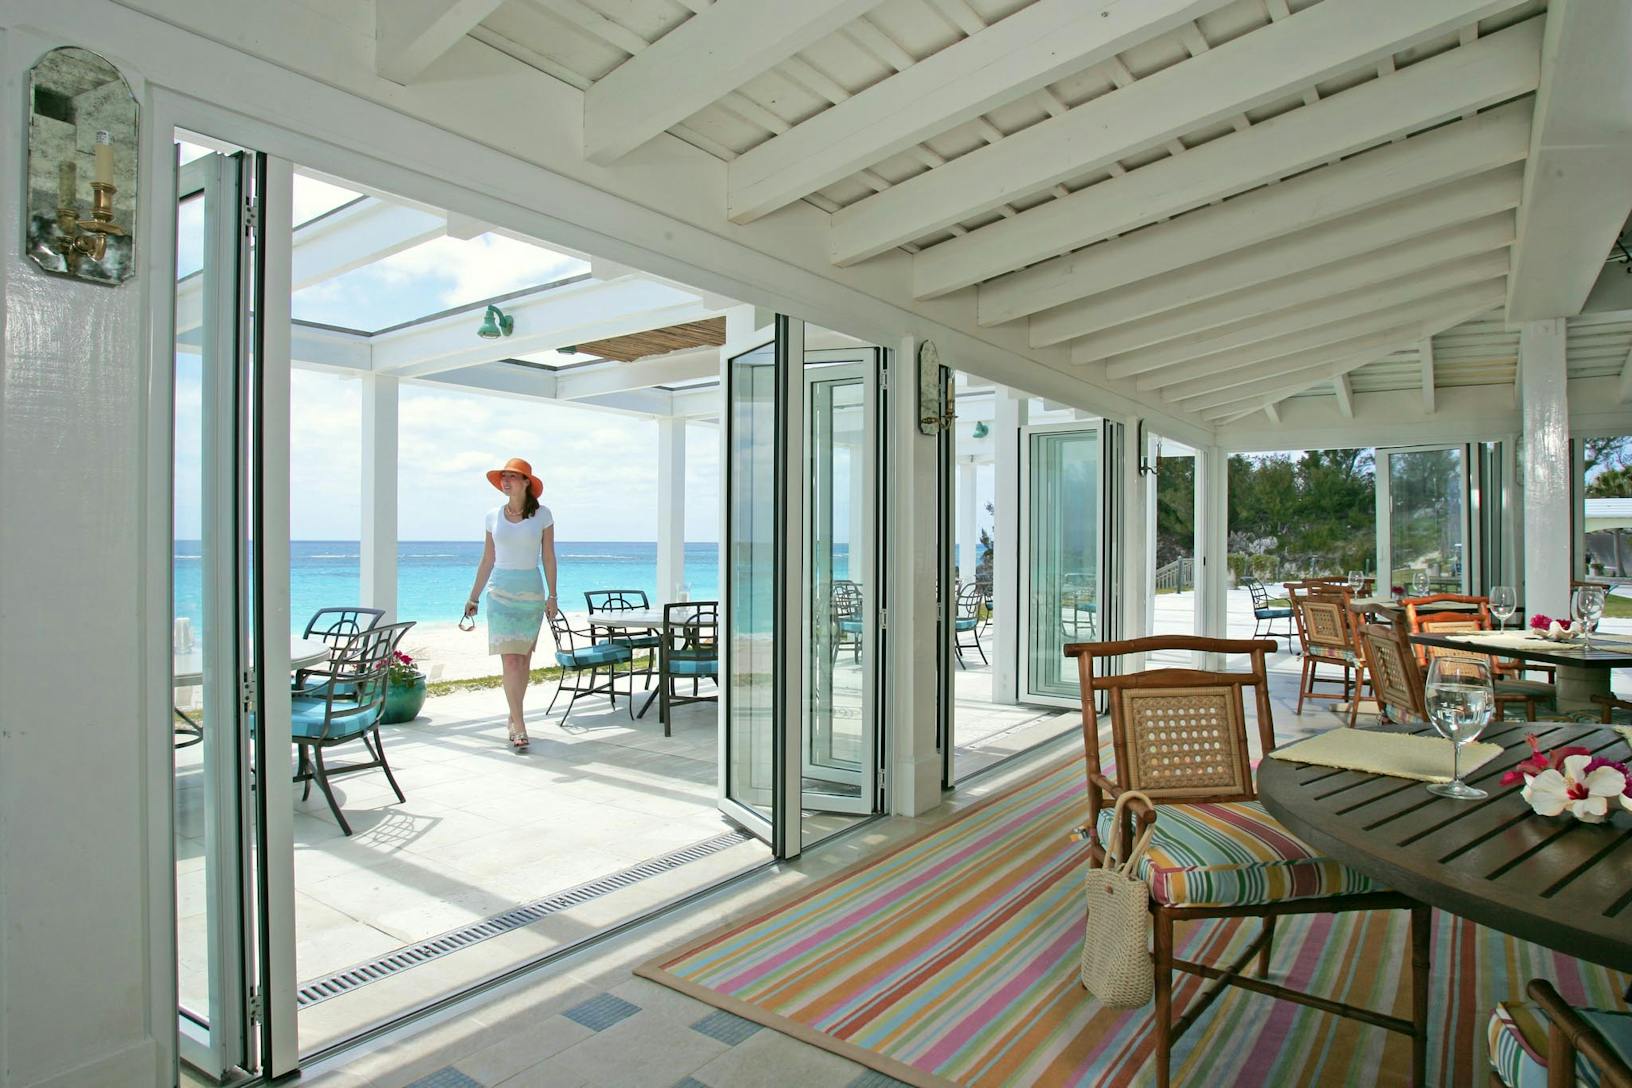 Extreme weather performance glass walls at Tuckers Point in Bermuda